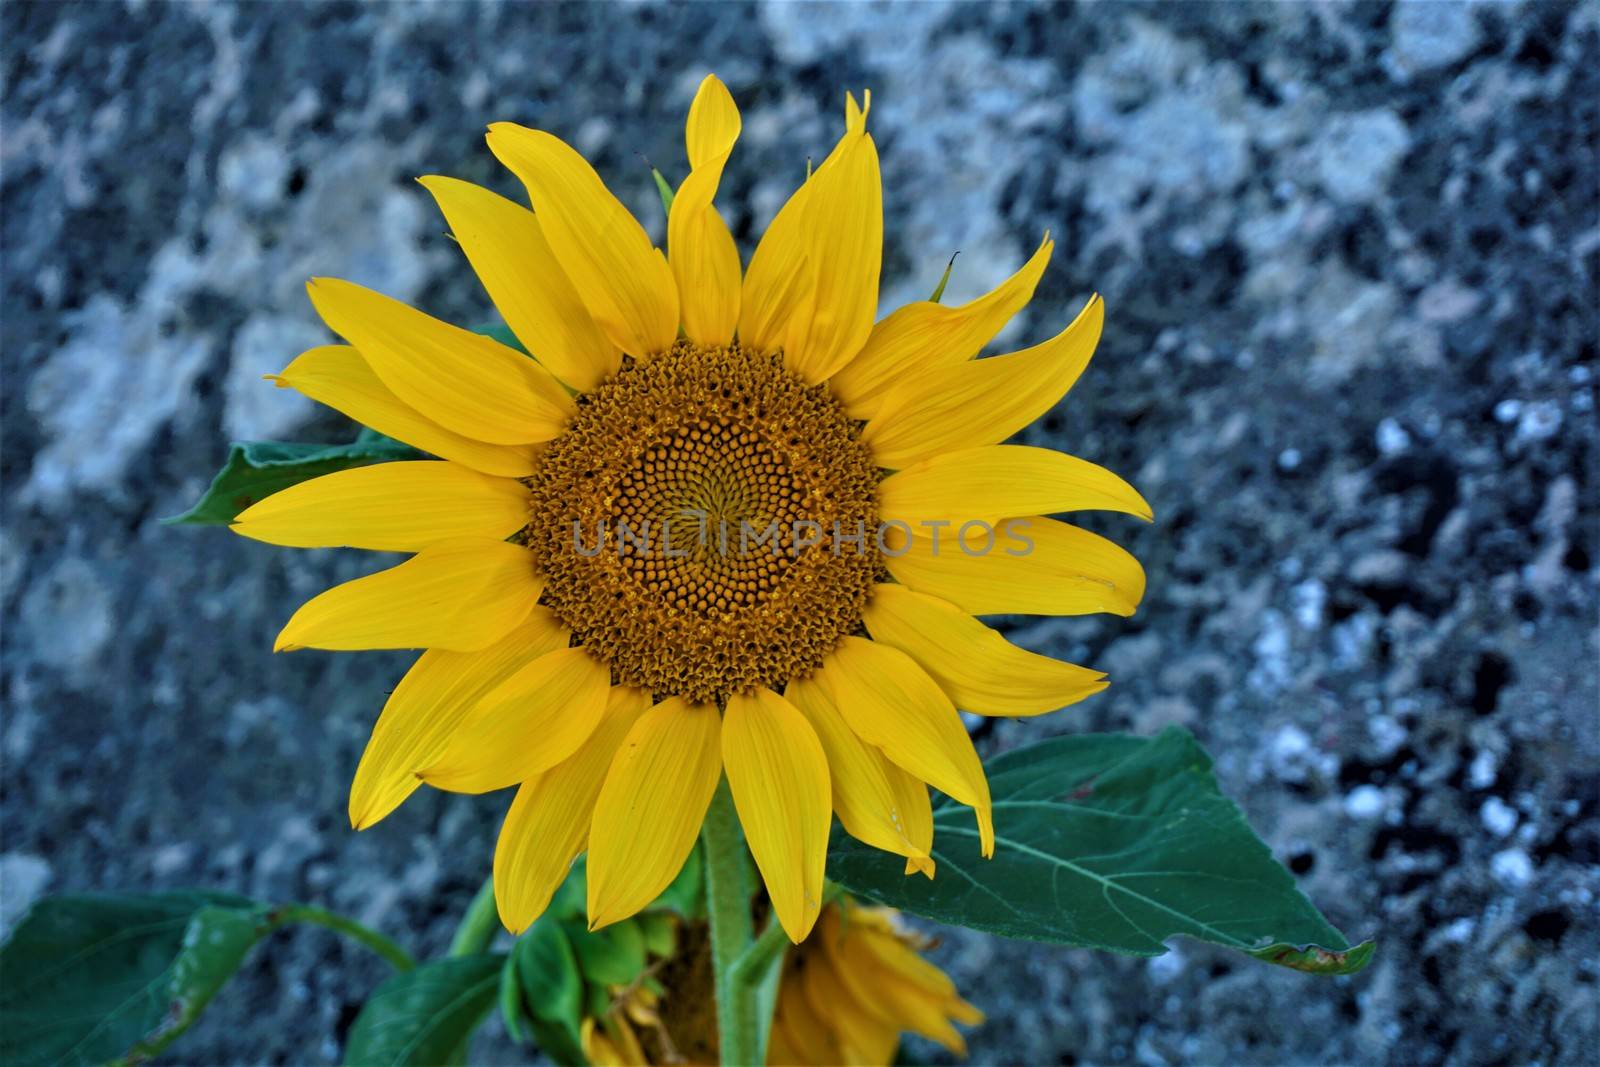 Sunflower in front of concrete wall by pisces2386